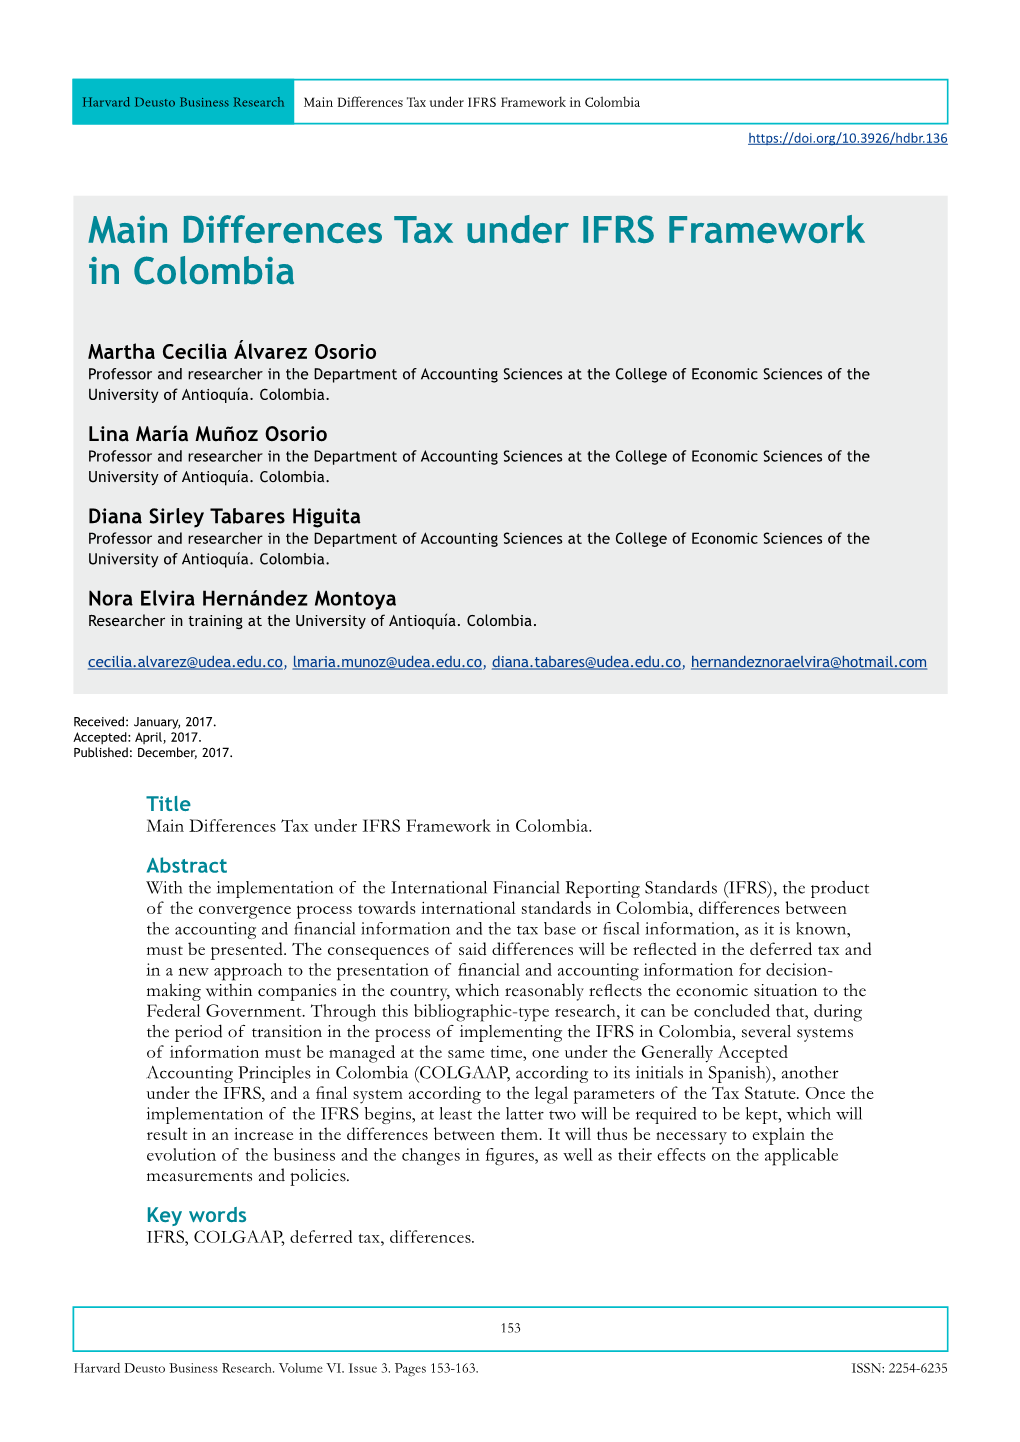 Main Differences Tax Under IFRS Framework in Colombia